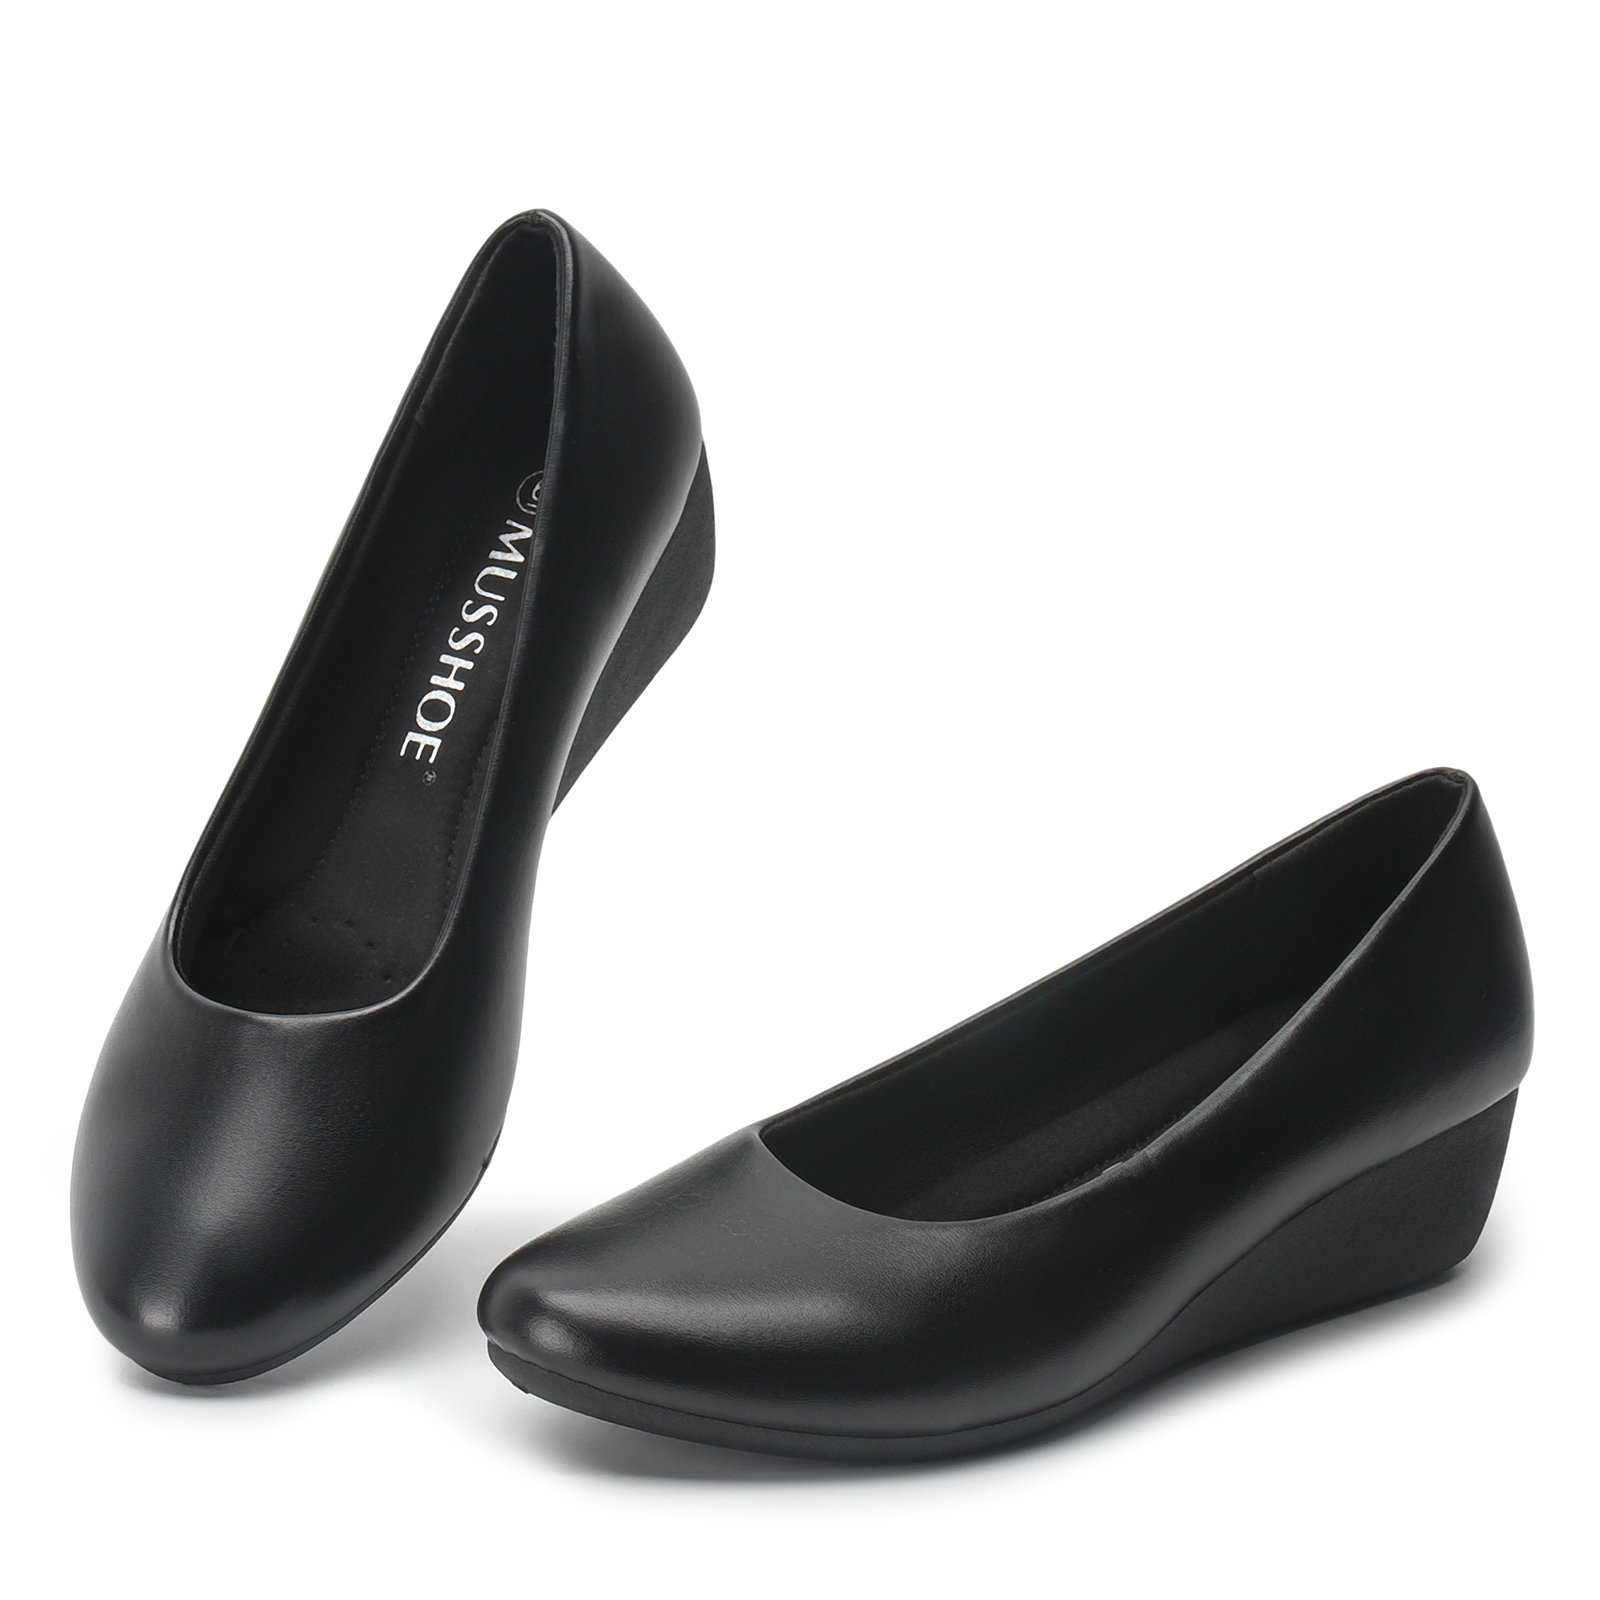 MUSSHOE Comfortable Slip On Round Toe Flats Loafers